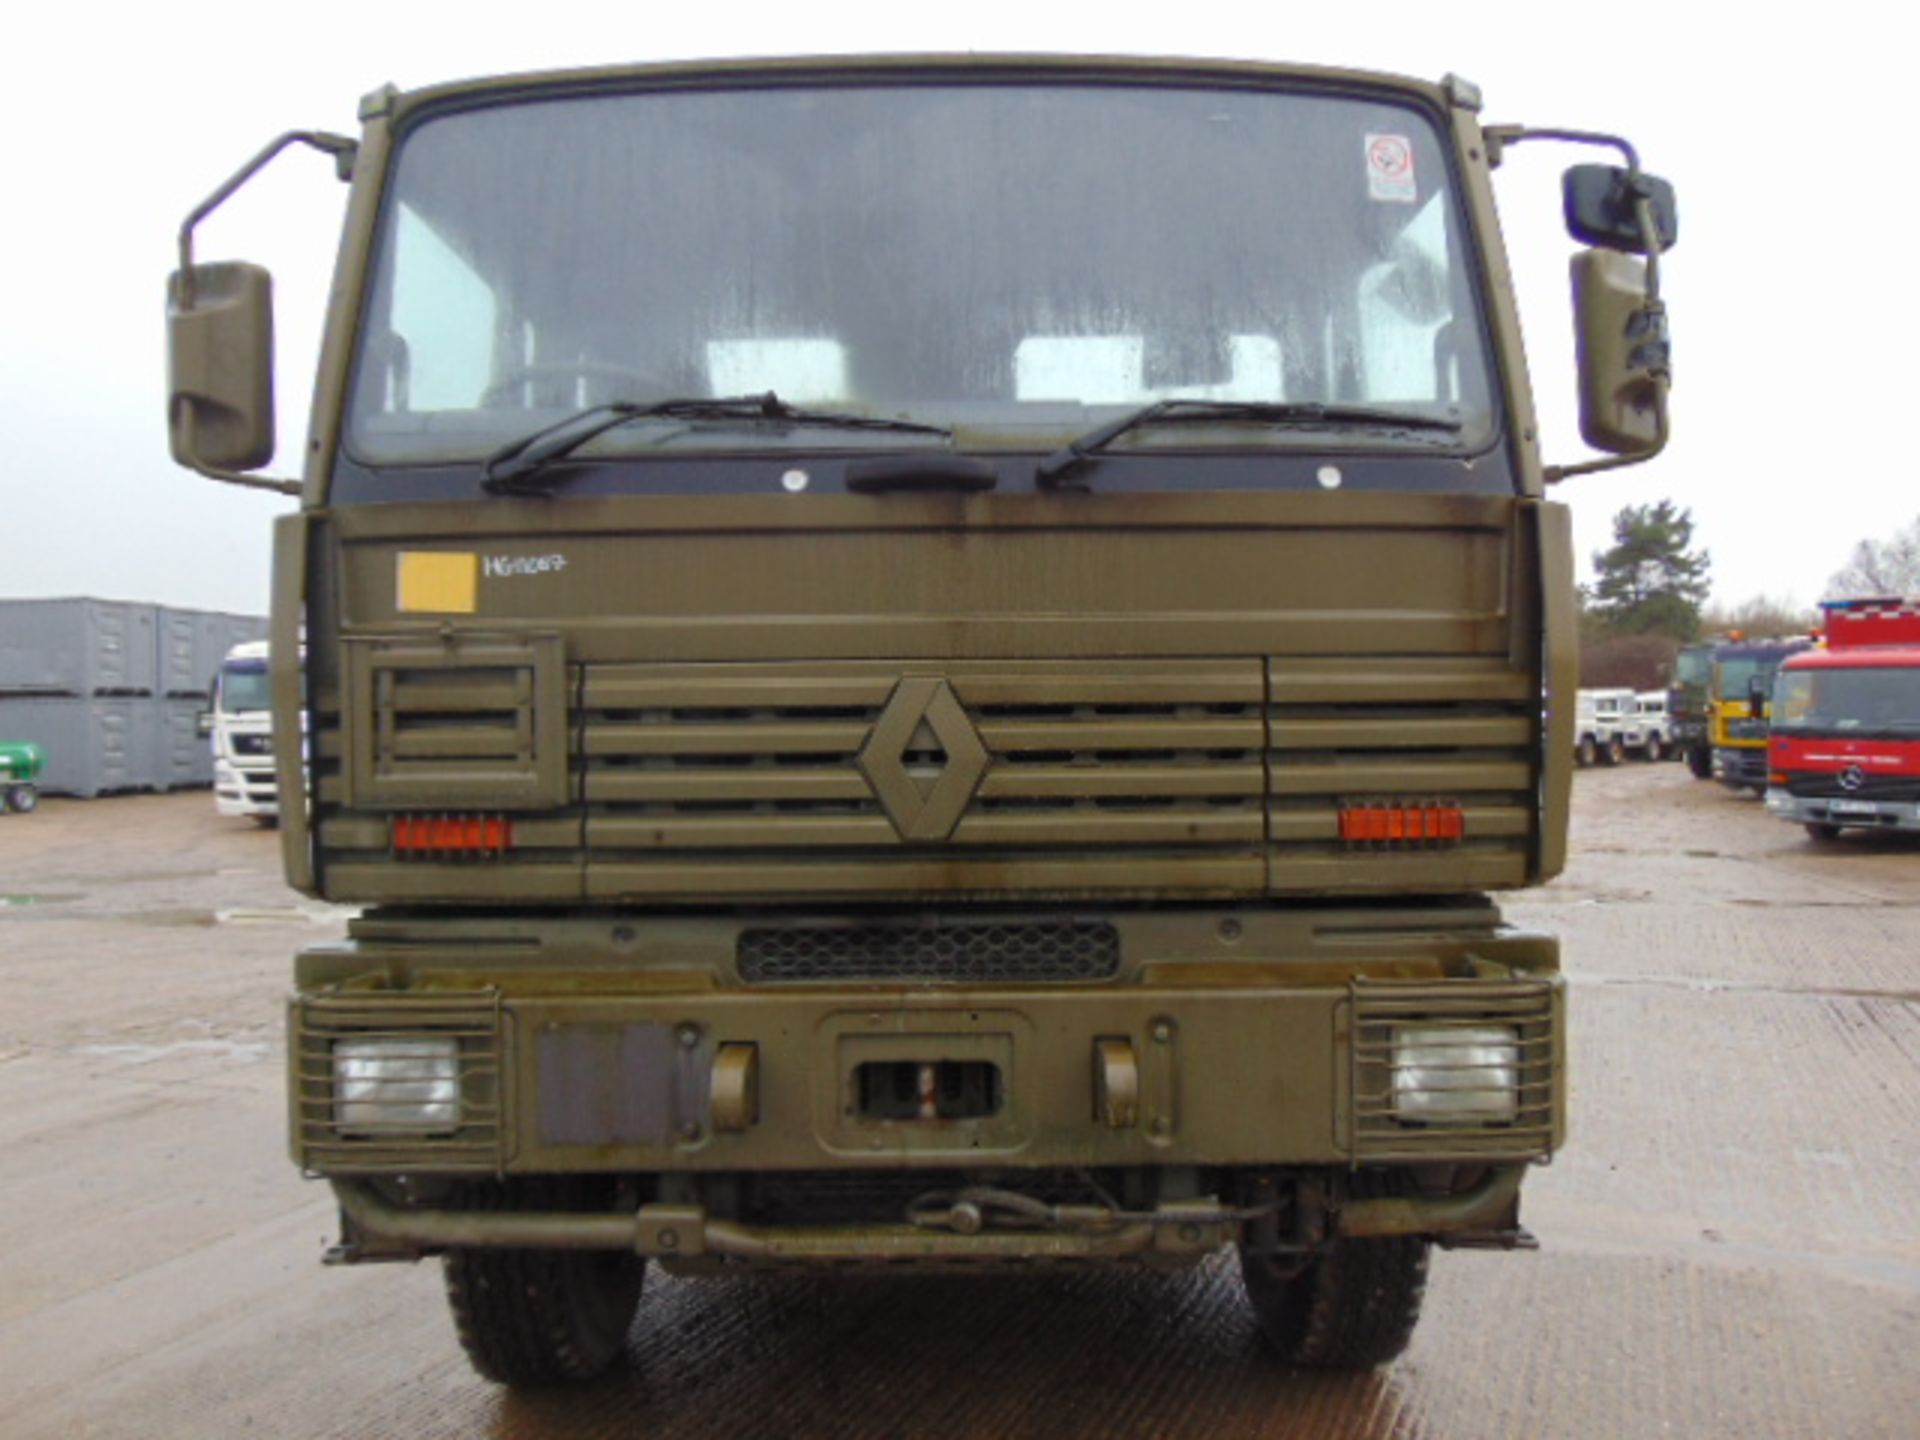 Renault G300 Maxter RHD 4x4 8T Cargo Truck with Fitted Winch - Image 2 of 17